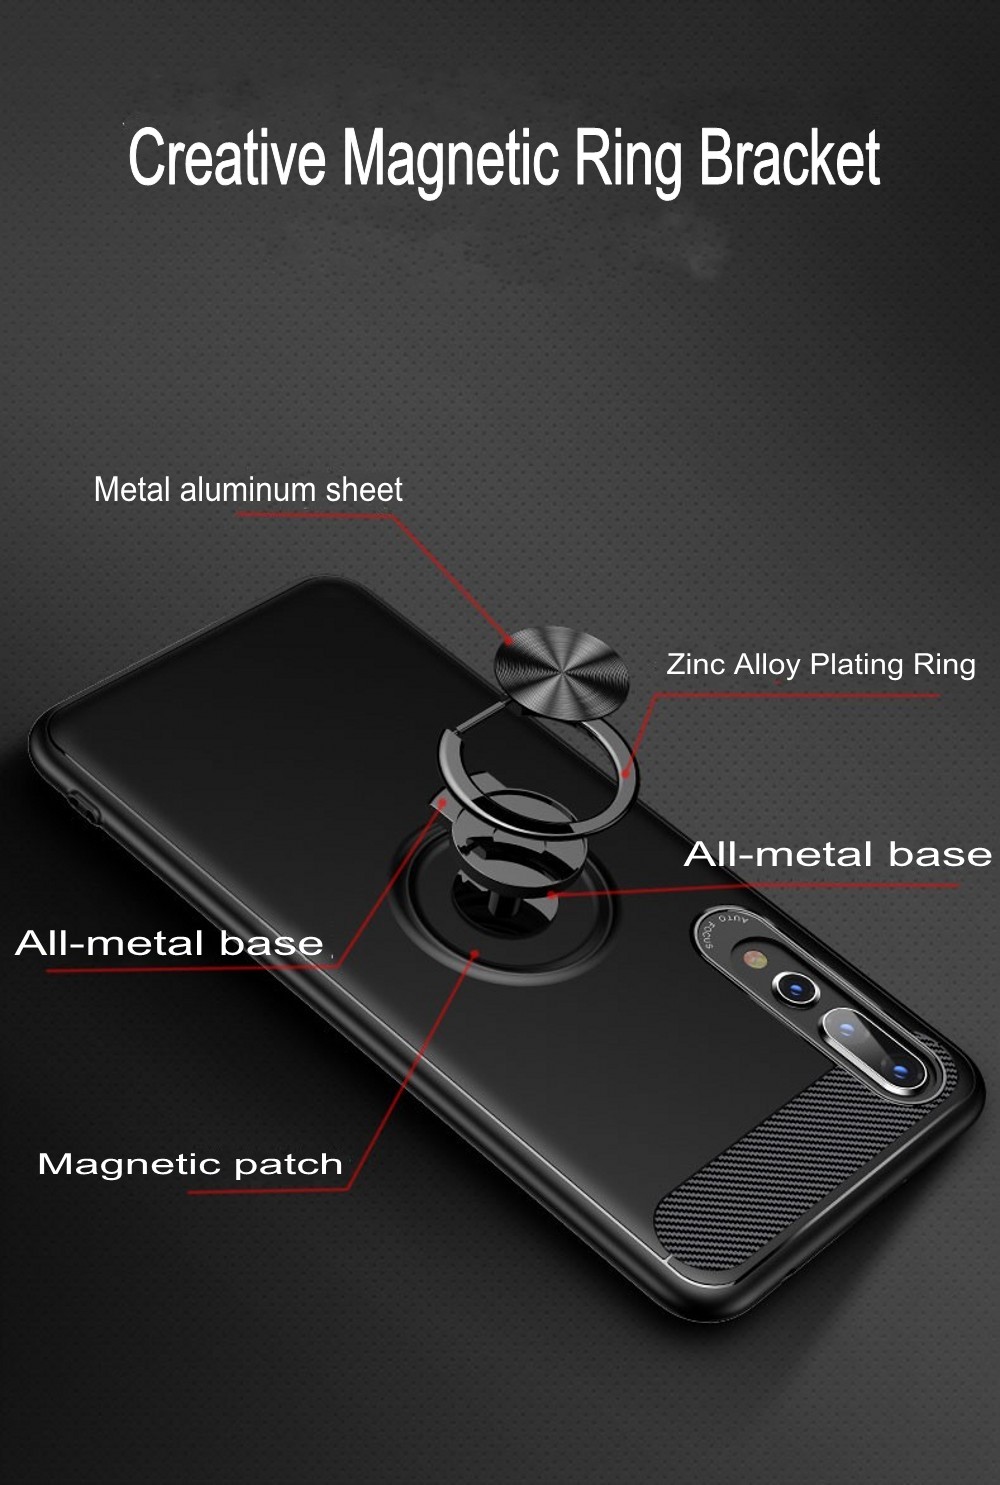 Bakeey-360deg-Adjustable-Metal-Ring-Magnetic-PC-Protective-Case-for-Huawei-P20--P20-Lite--P20-Pro-1305848